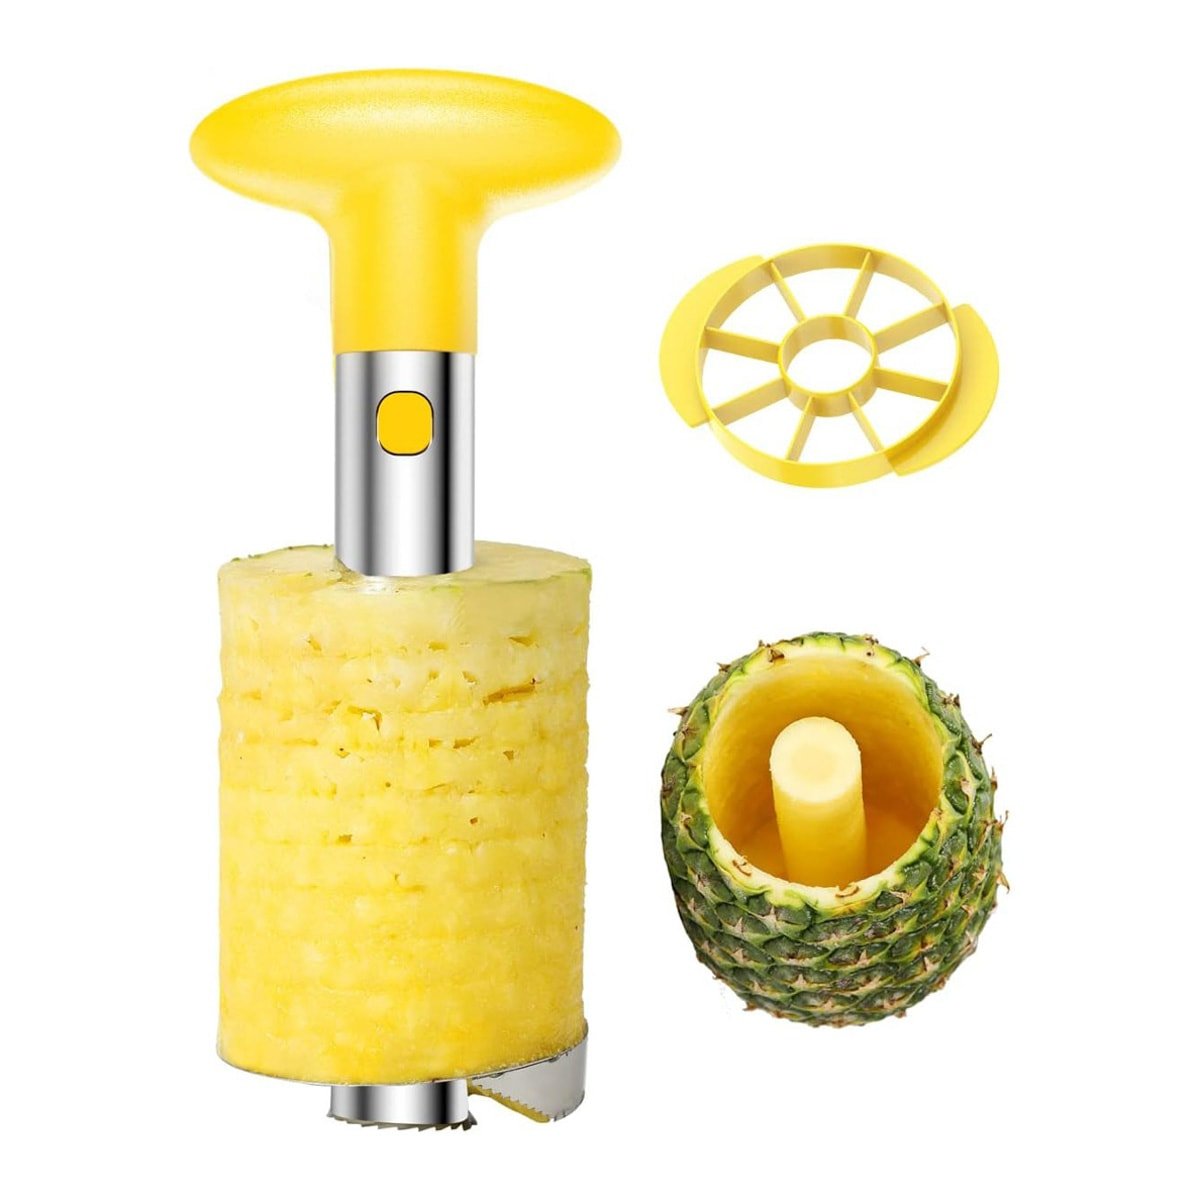 Stainless steel pineapple peeler cutting through a pineapple.